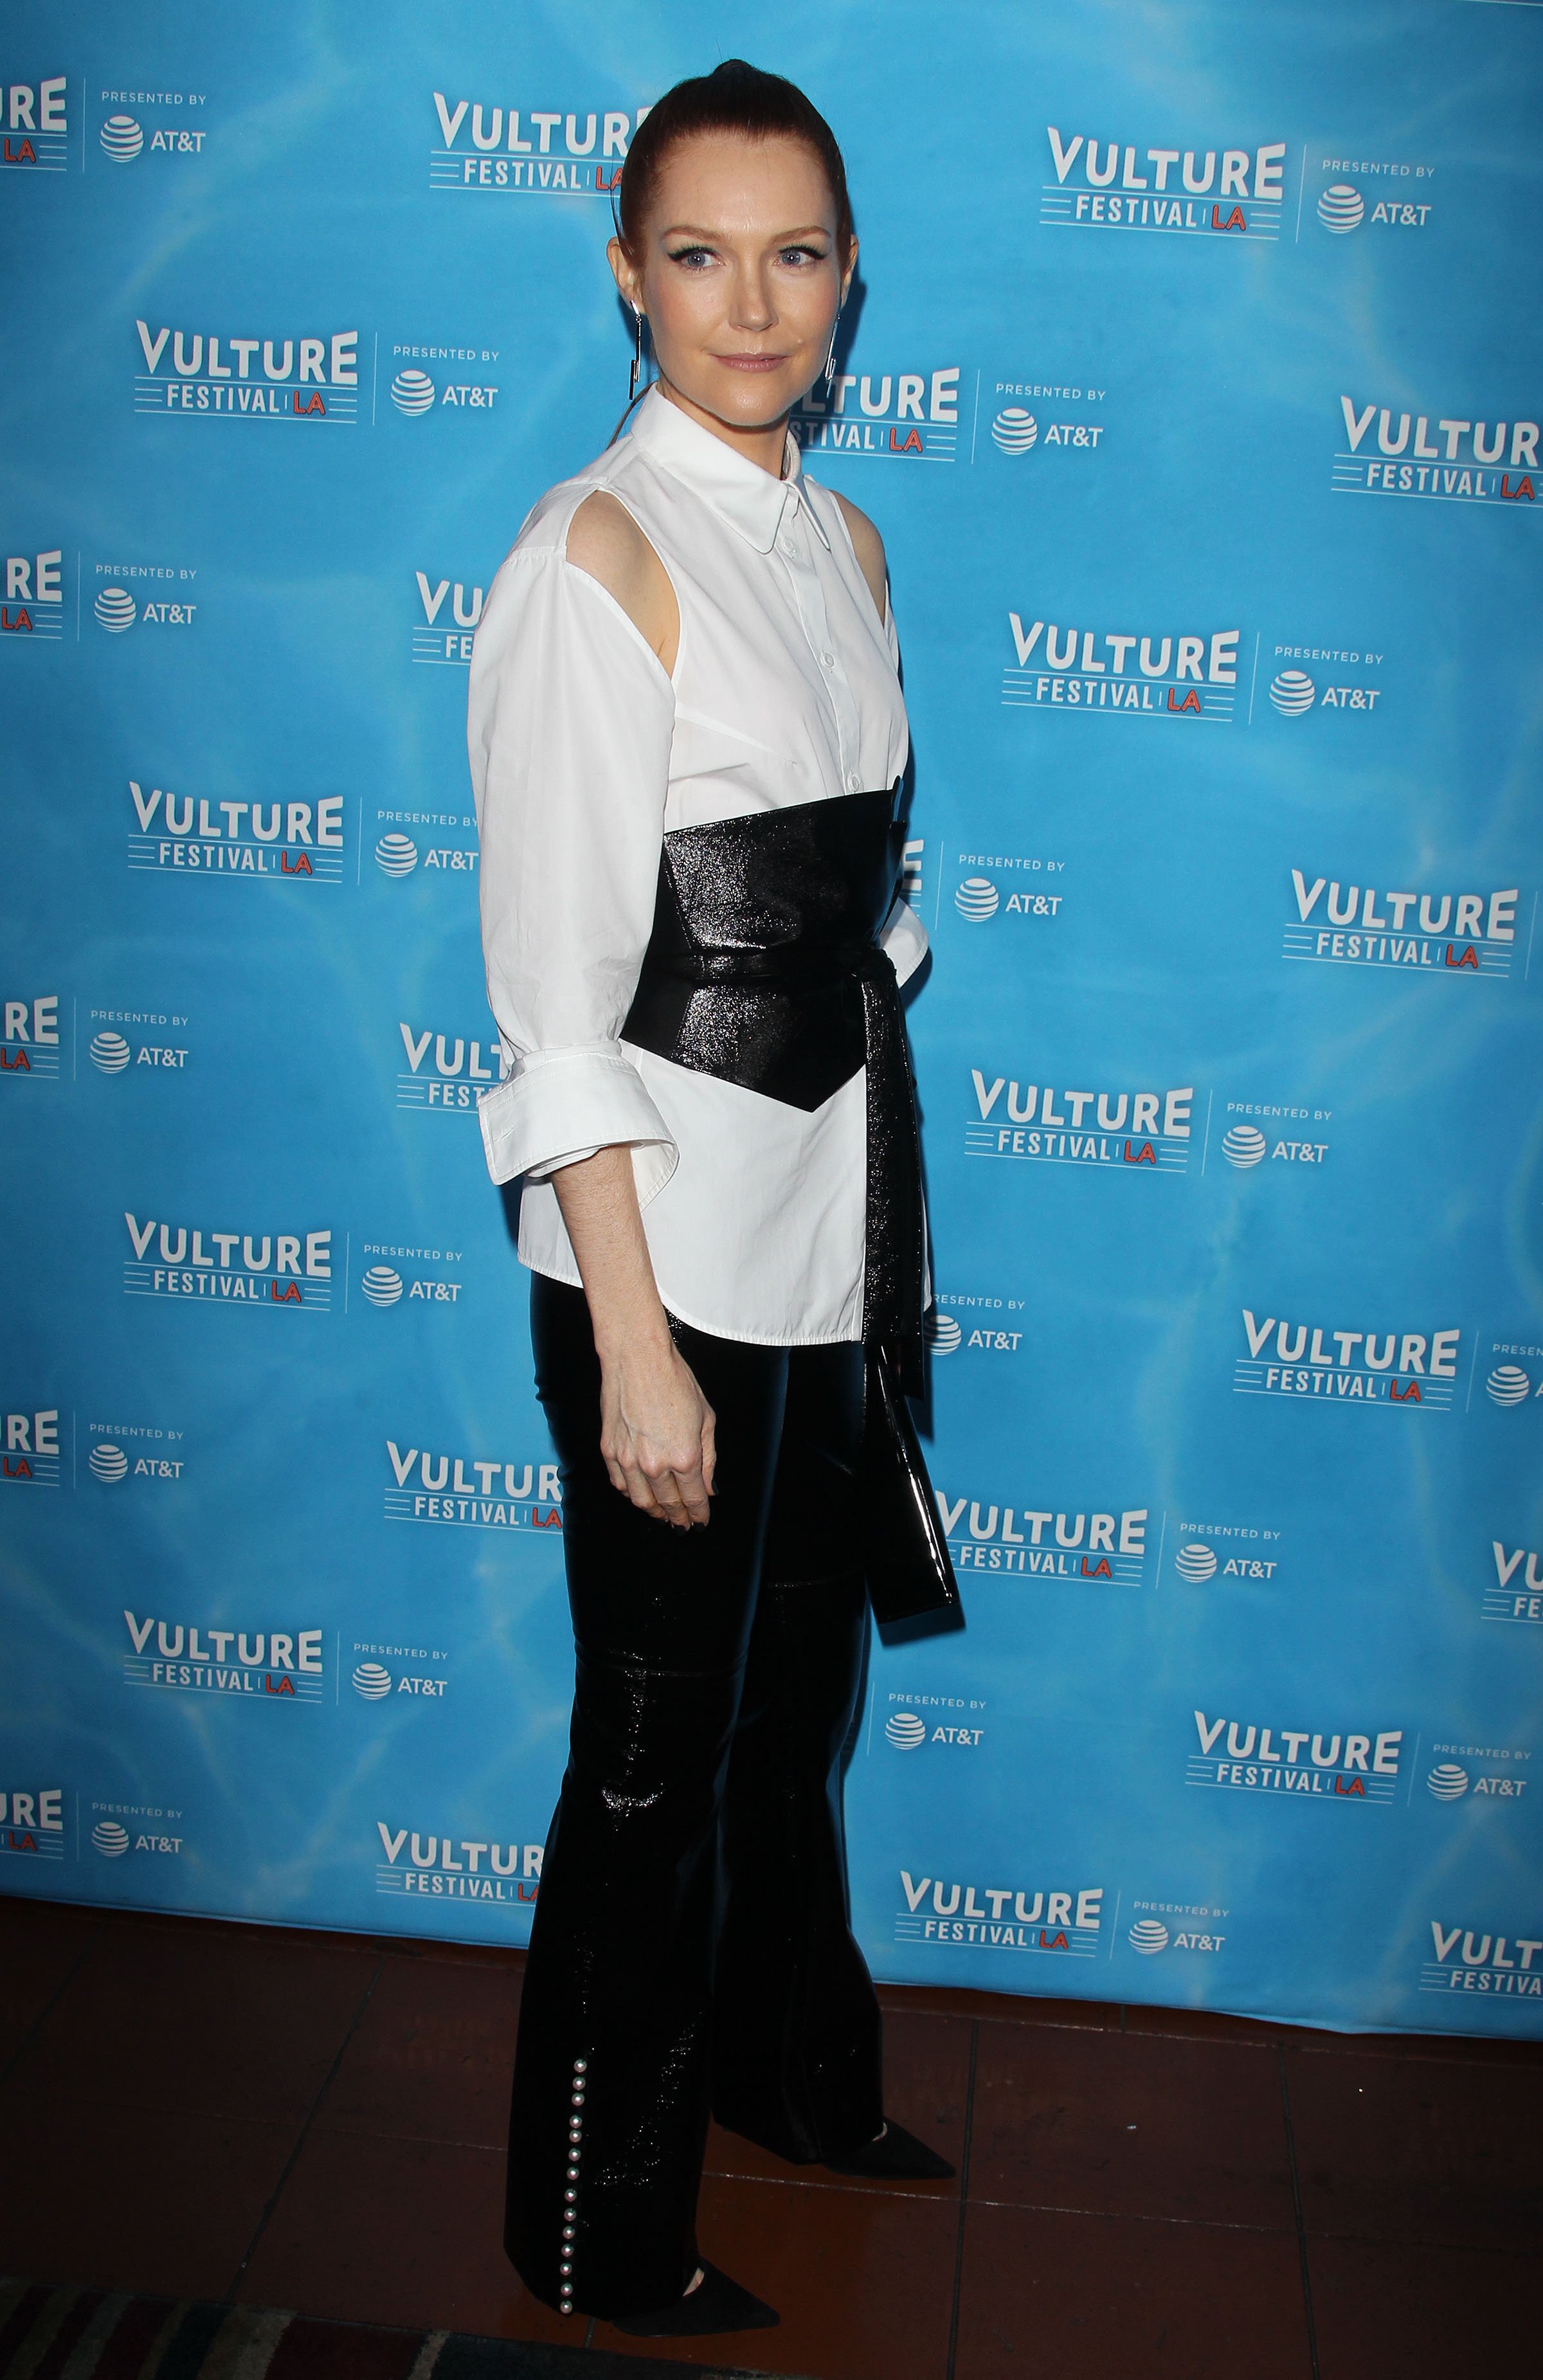 Darby Stanchfield attends Scandal Panel Vulture Festival